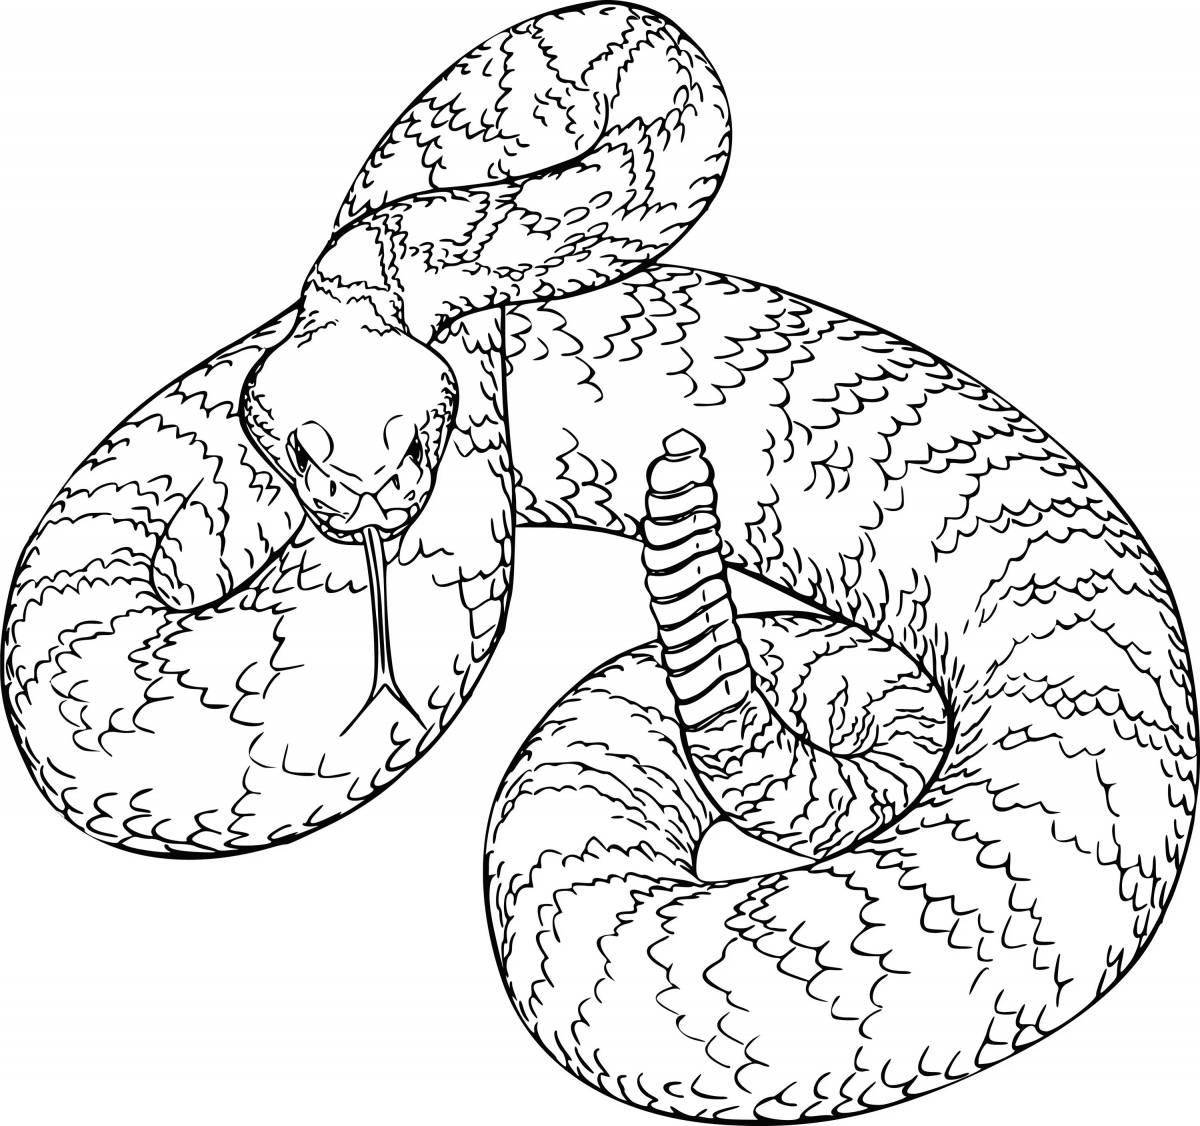 Coloring page dazzling snake